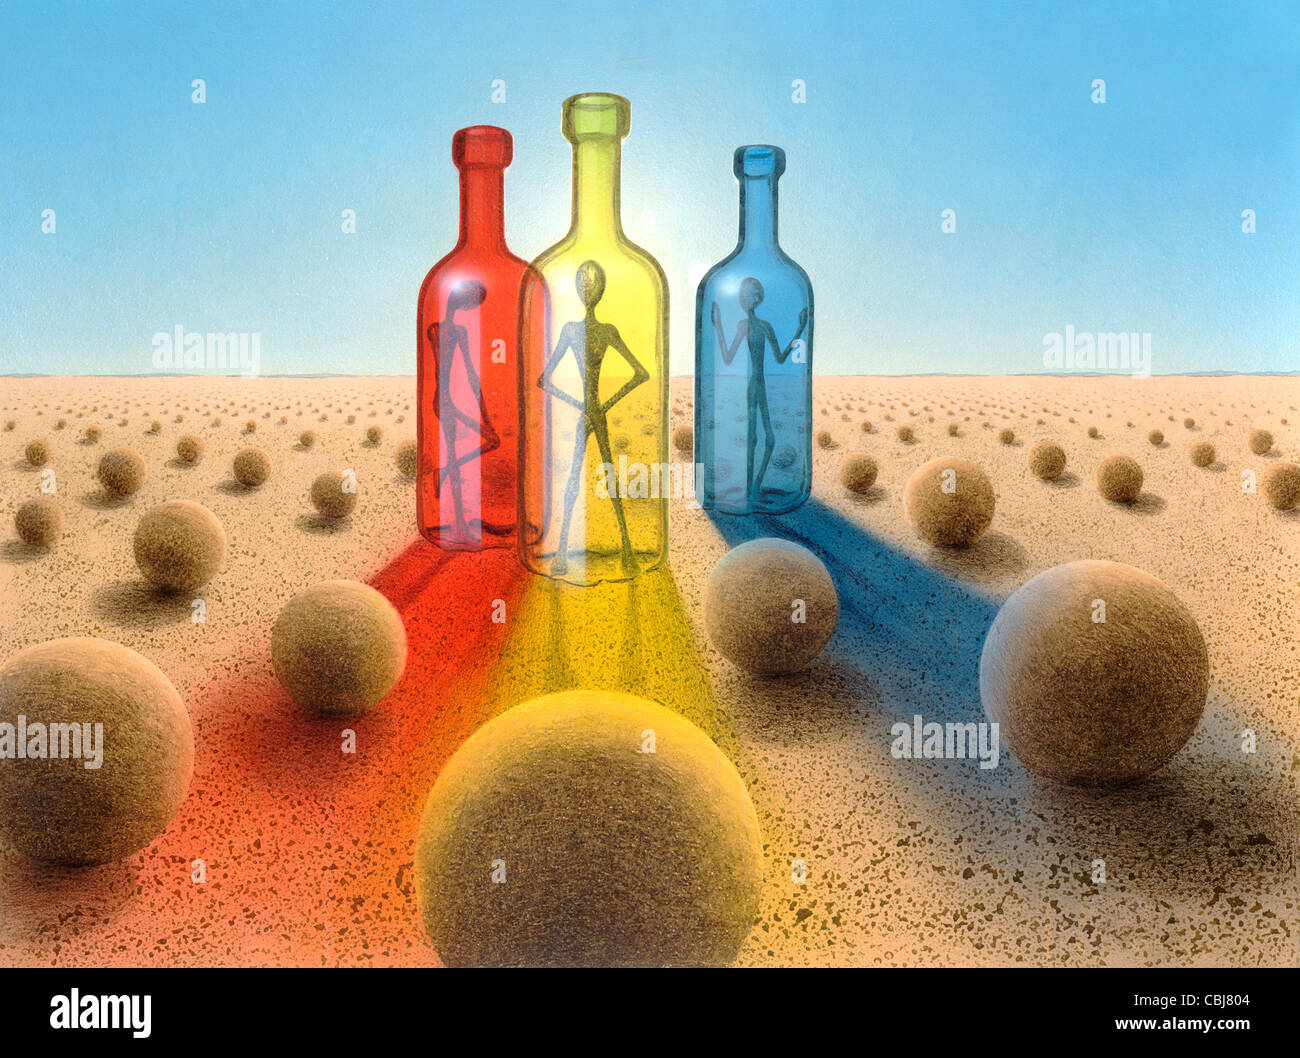 surreal picture painted by me named 'Three Bottles'.Its showing three colored glass bottles with alien-like figures inside, Stock Photo